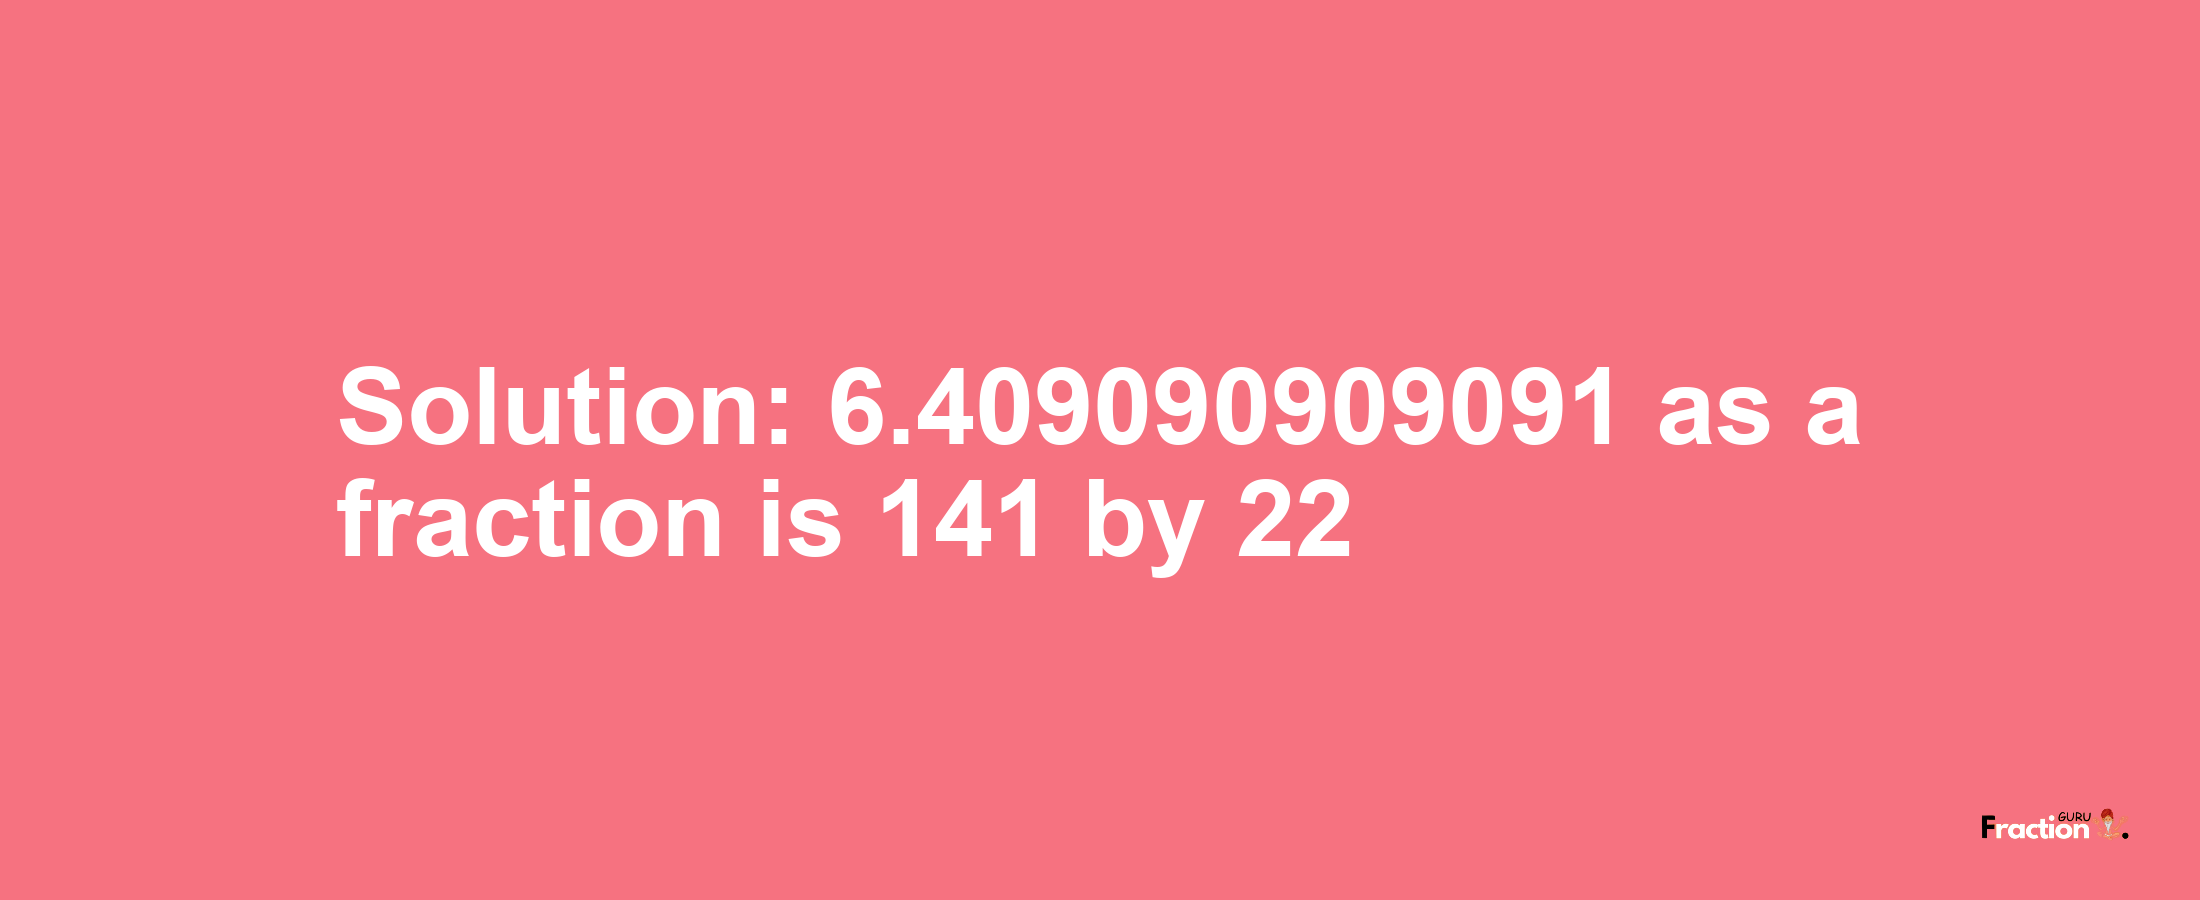 Solution:6.409090909091 as a fraction is 141/22